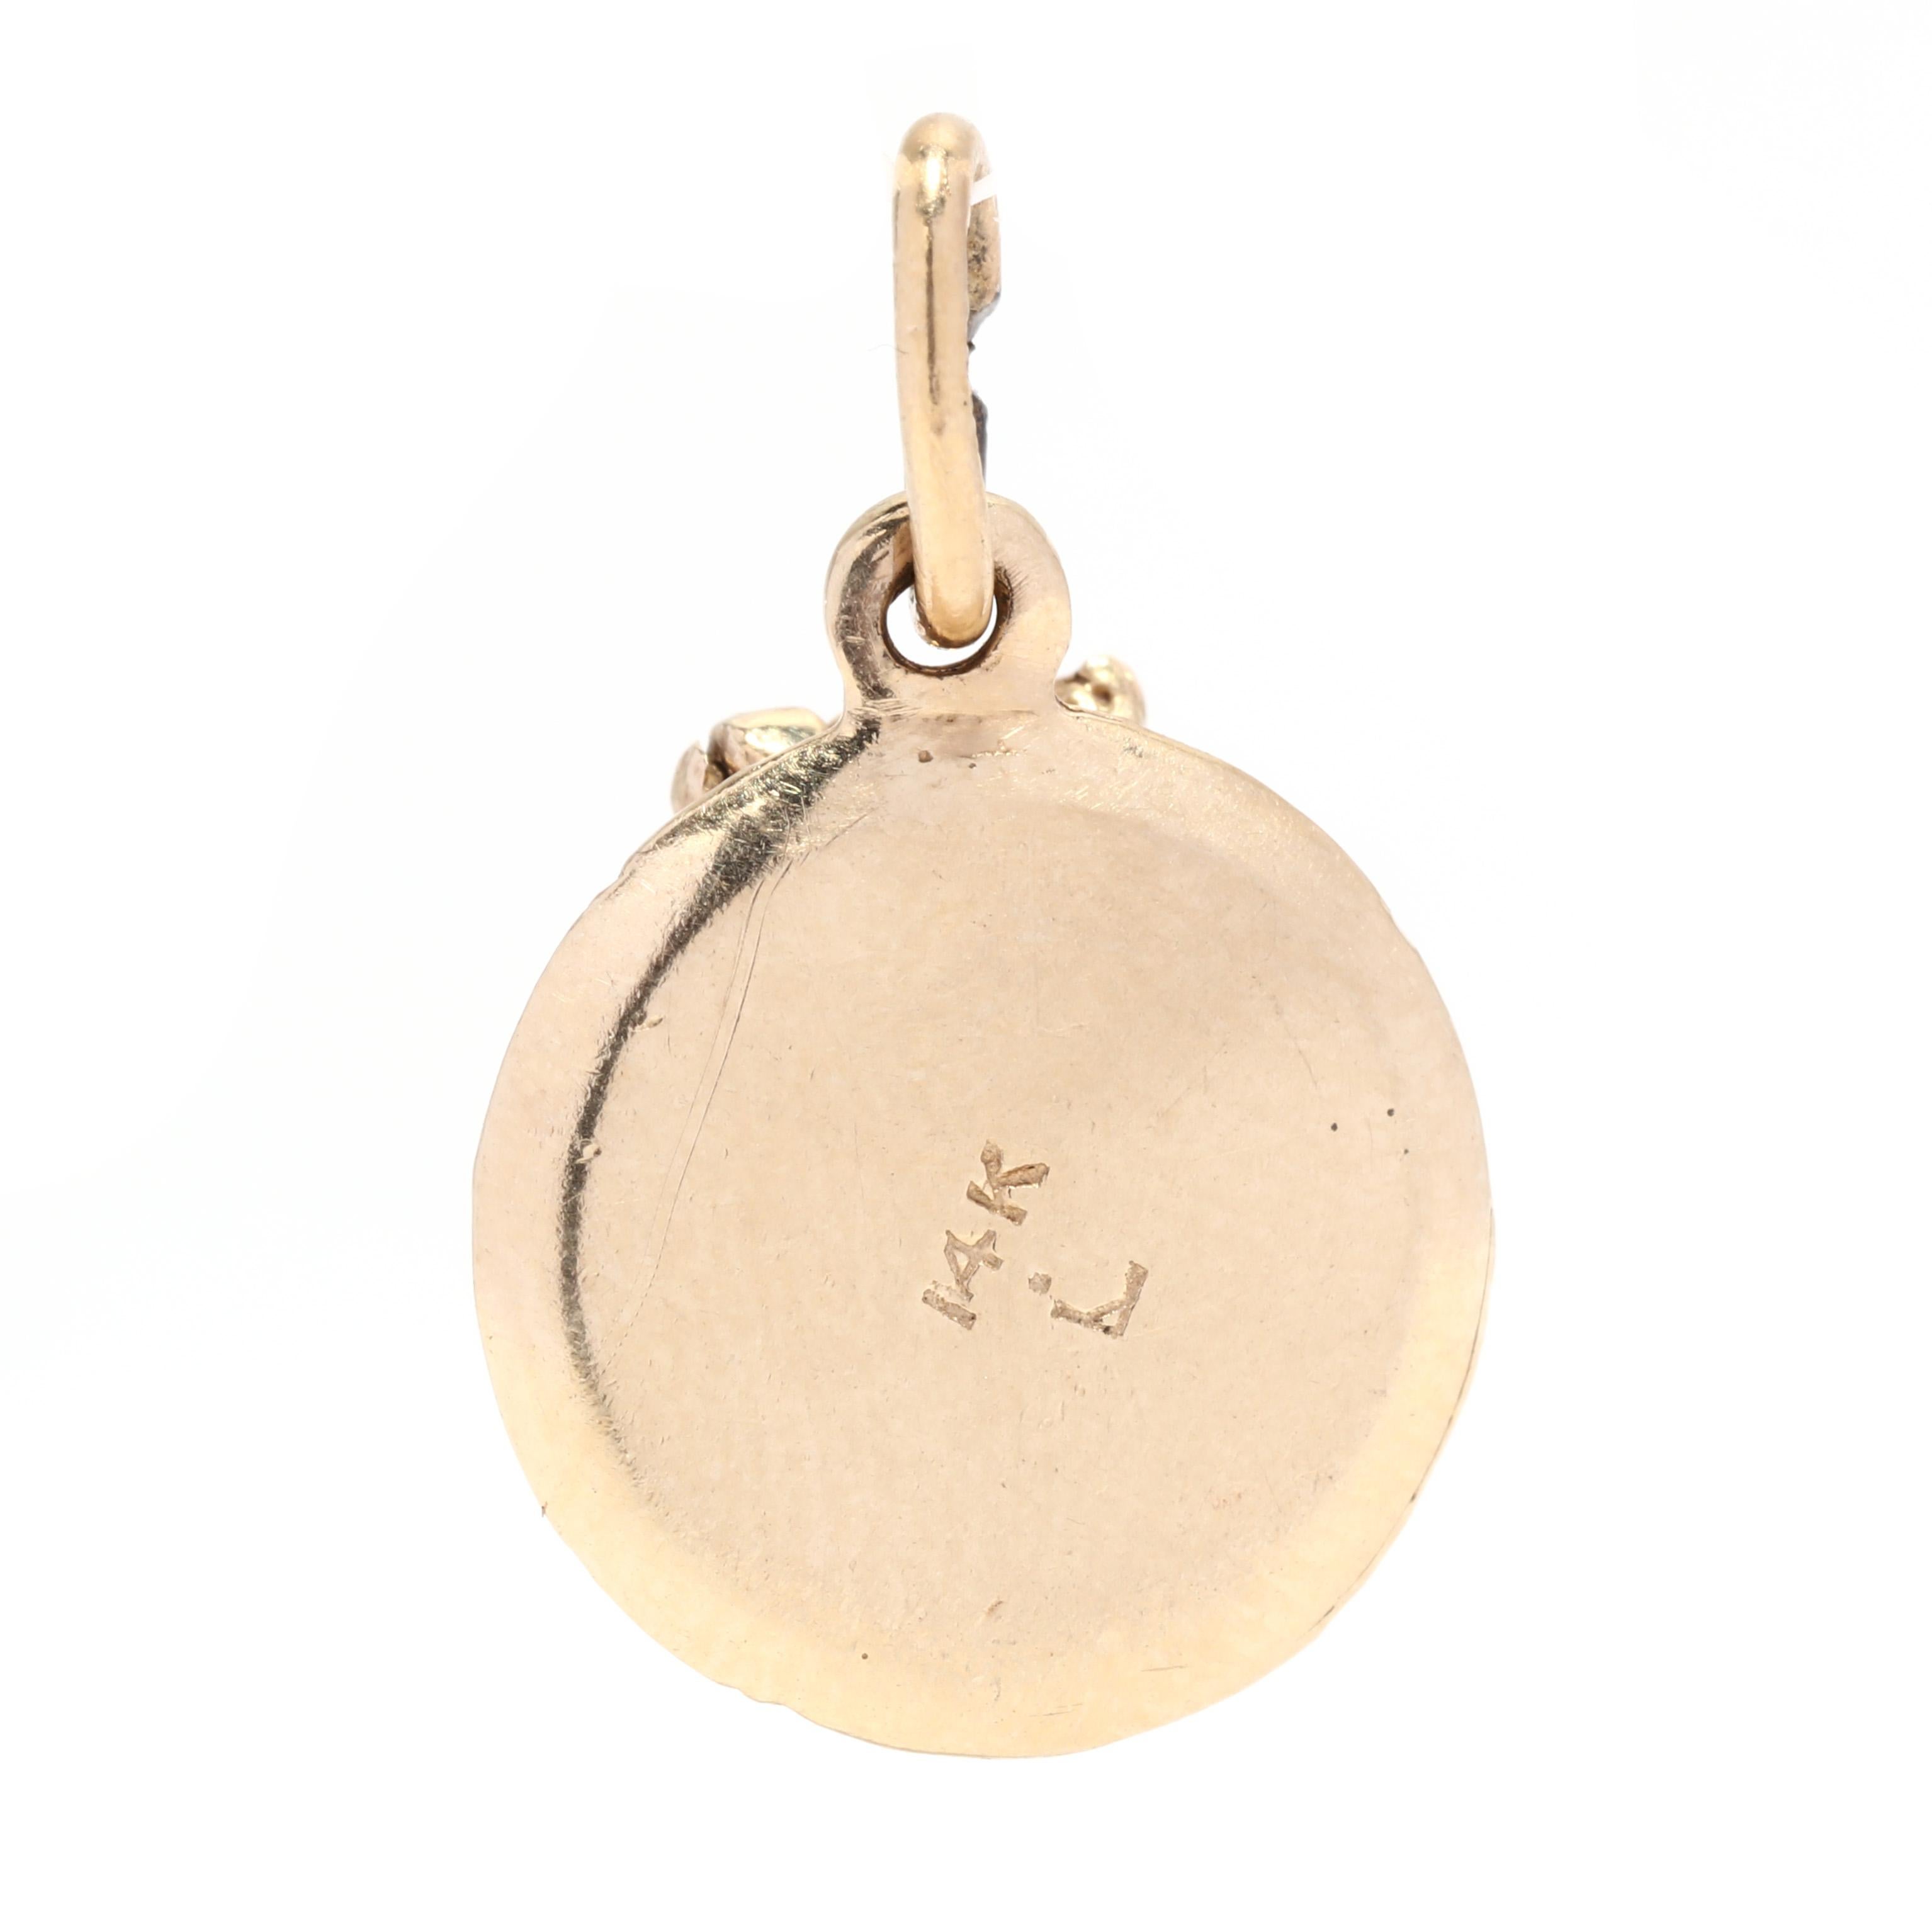 A vintage 14 karat yellow gold 'Happy Anniversary' enamel cake charm. This small gold charm features a round shape with applied detailing including 'Happy Anniversary' surrounded by white enamel, with an articulated top that opens to reveal a hidden